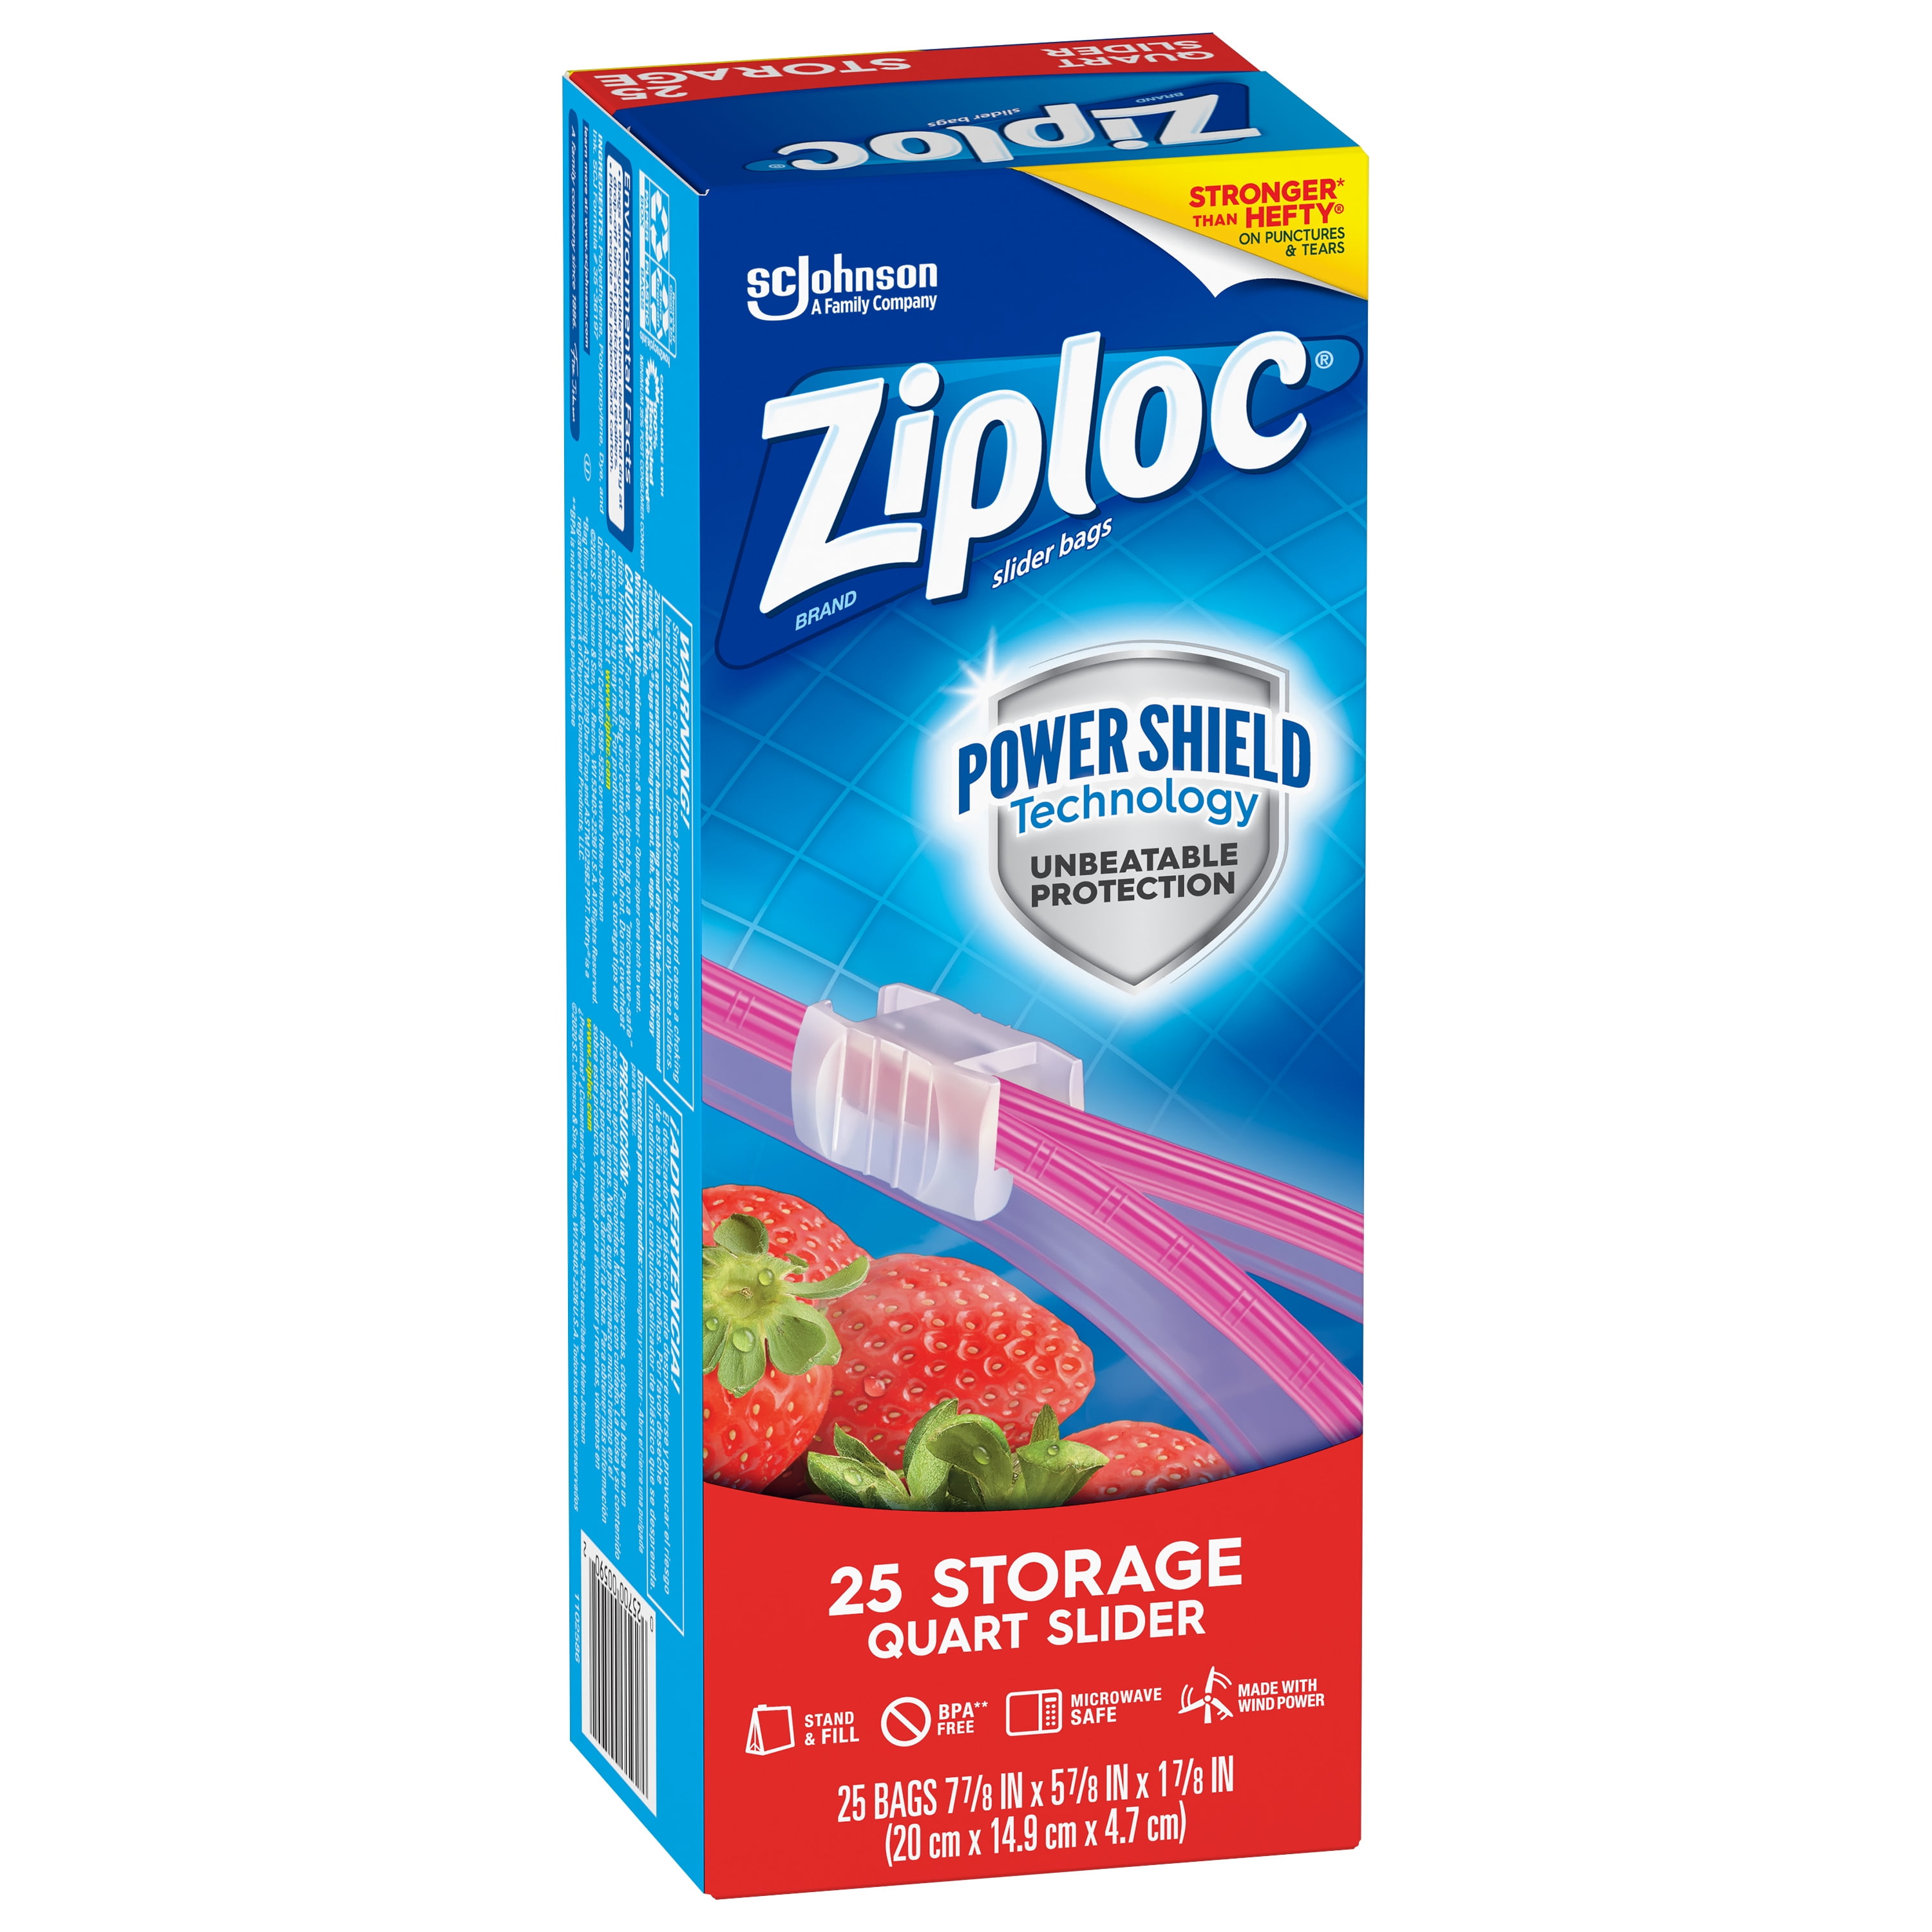 Ziploc Brand Slider Storage Bags with Power Shield Technology, Quart, 50 Count, Clear